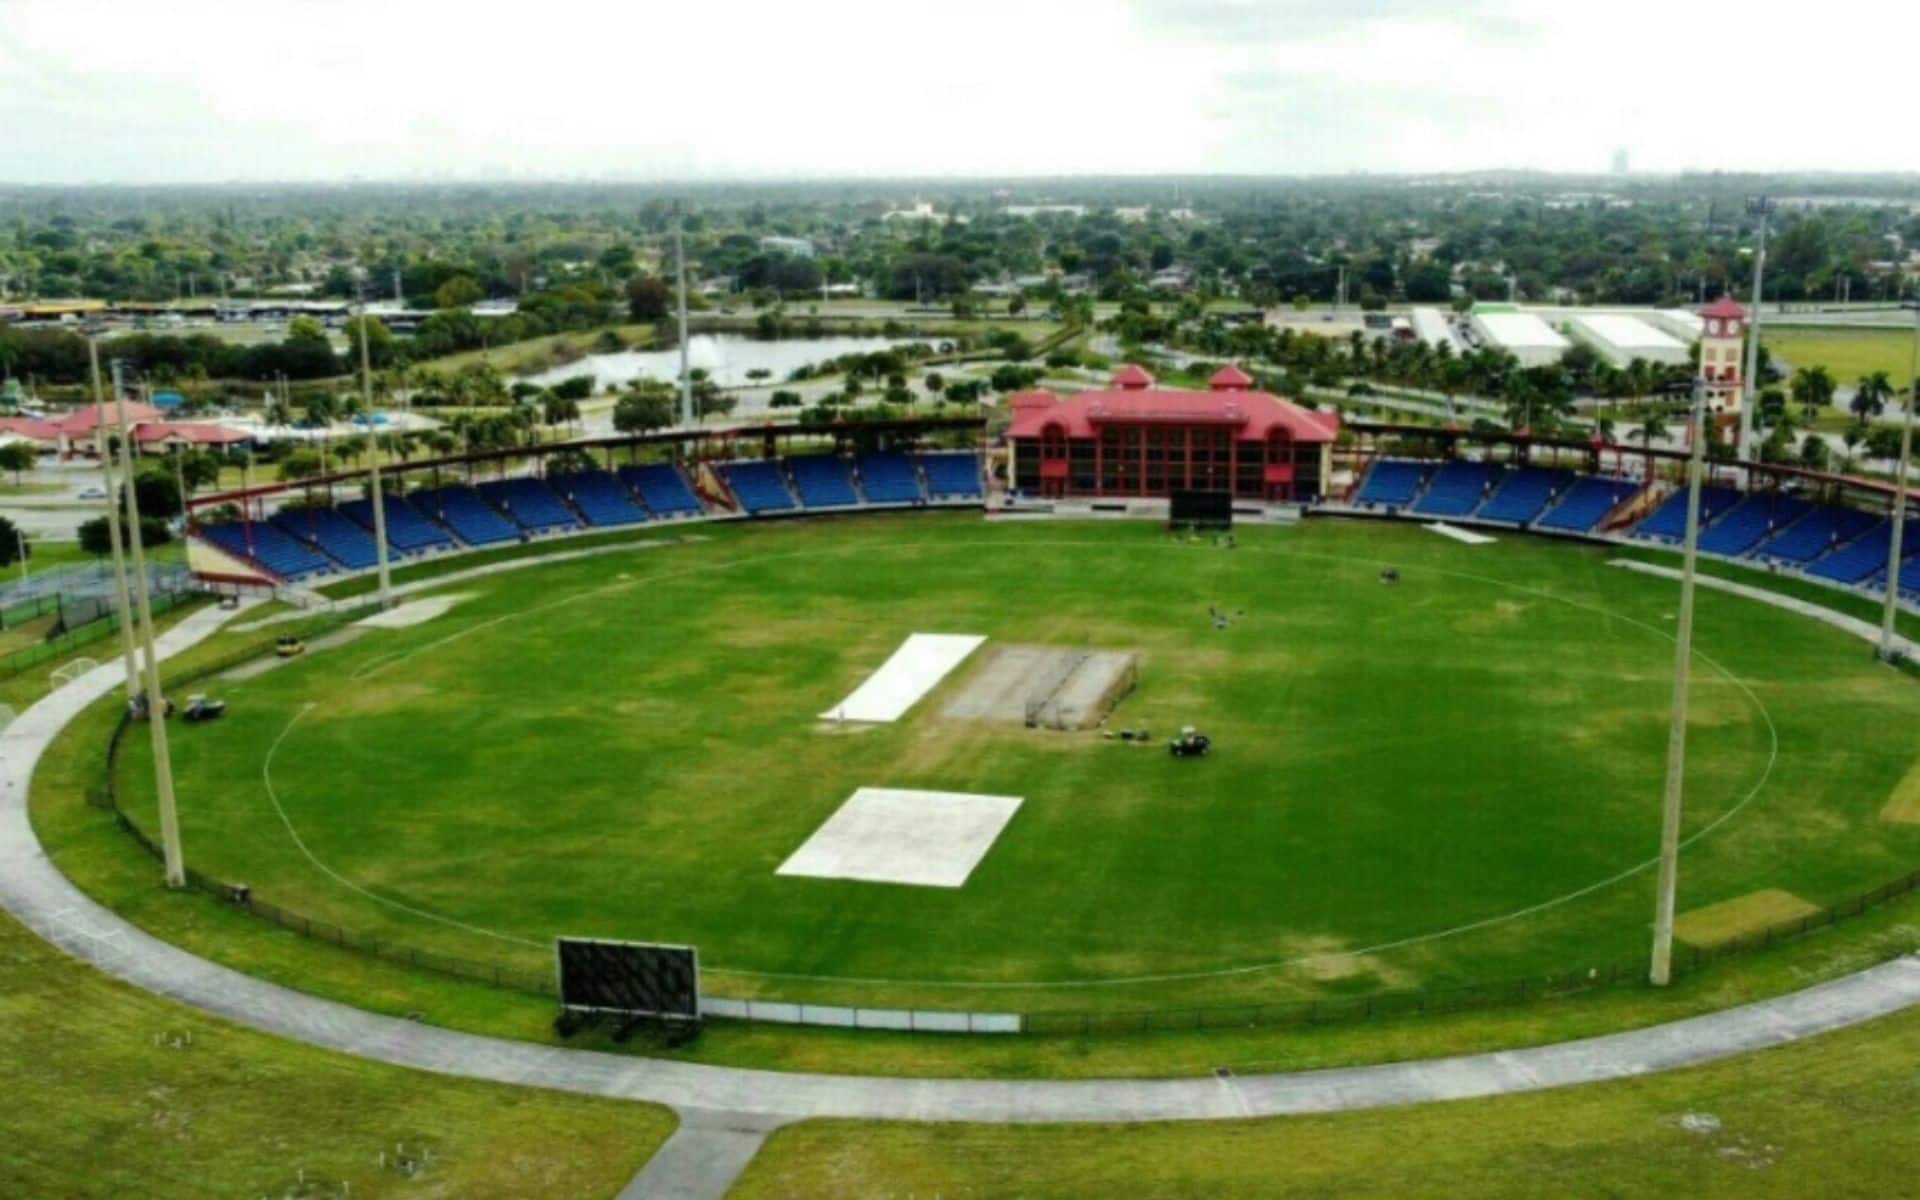 Central Broward Regional Park Lauderhill Florida Weather Report For SL vs NEP T20 World Cup Match